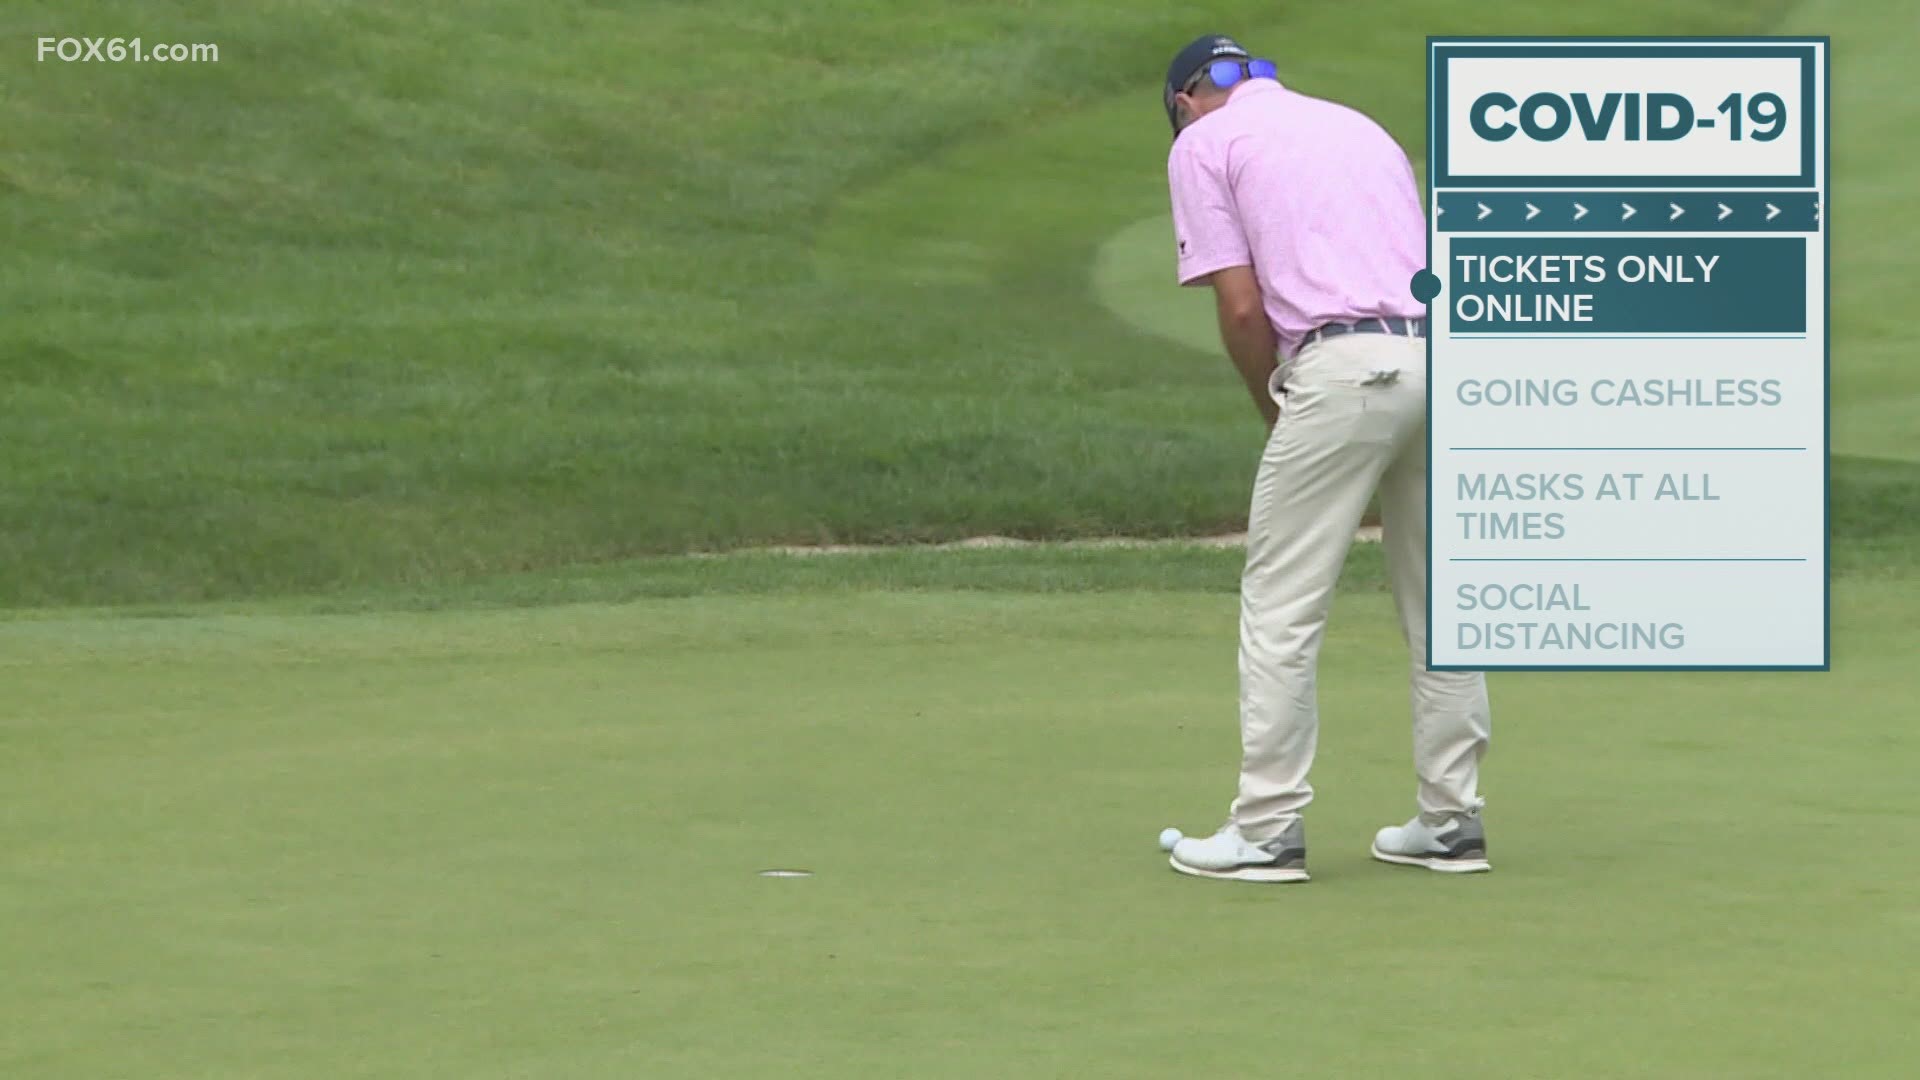 Travelers Championship tickets go on sale May 25, health and safety guidelines released fox61